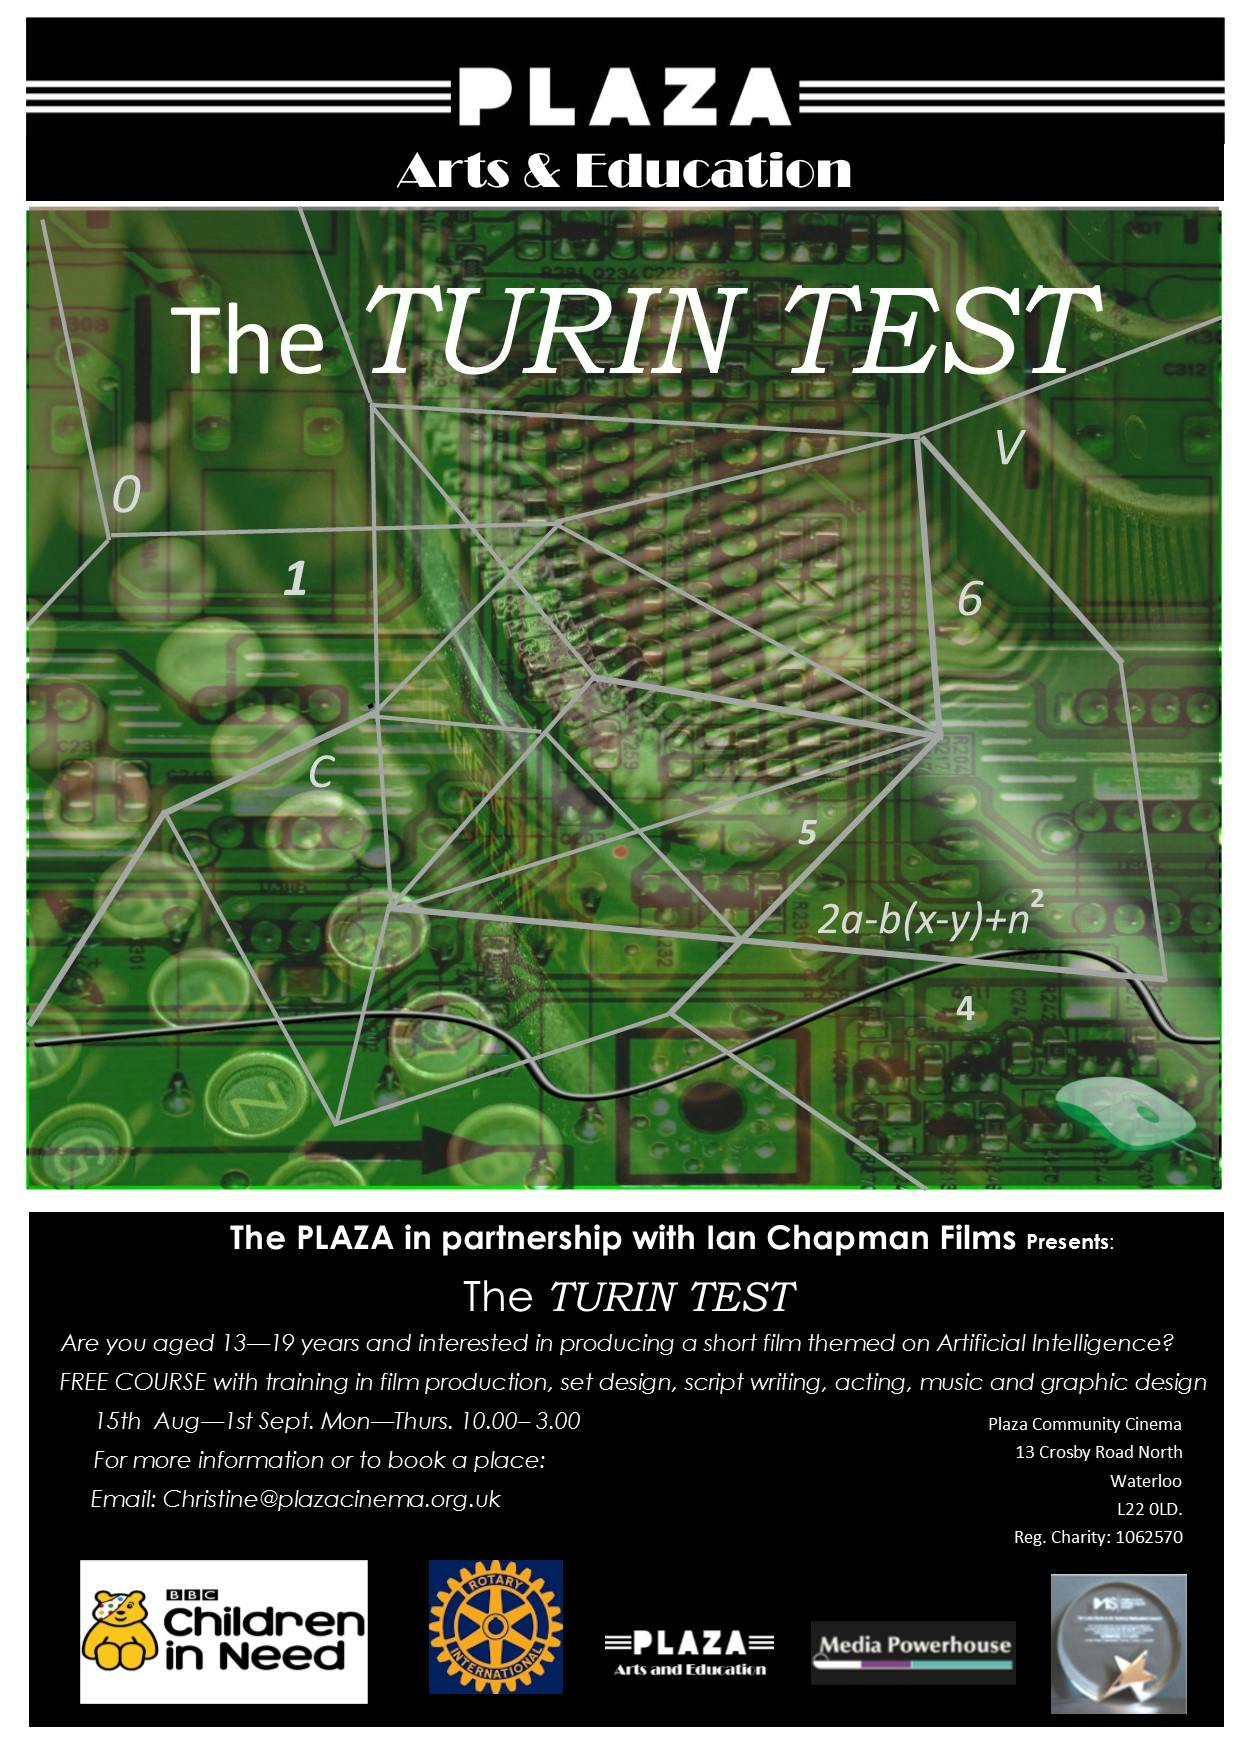 The Turin Test